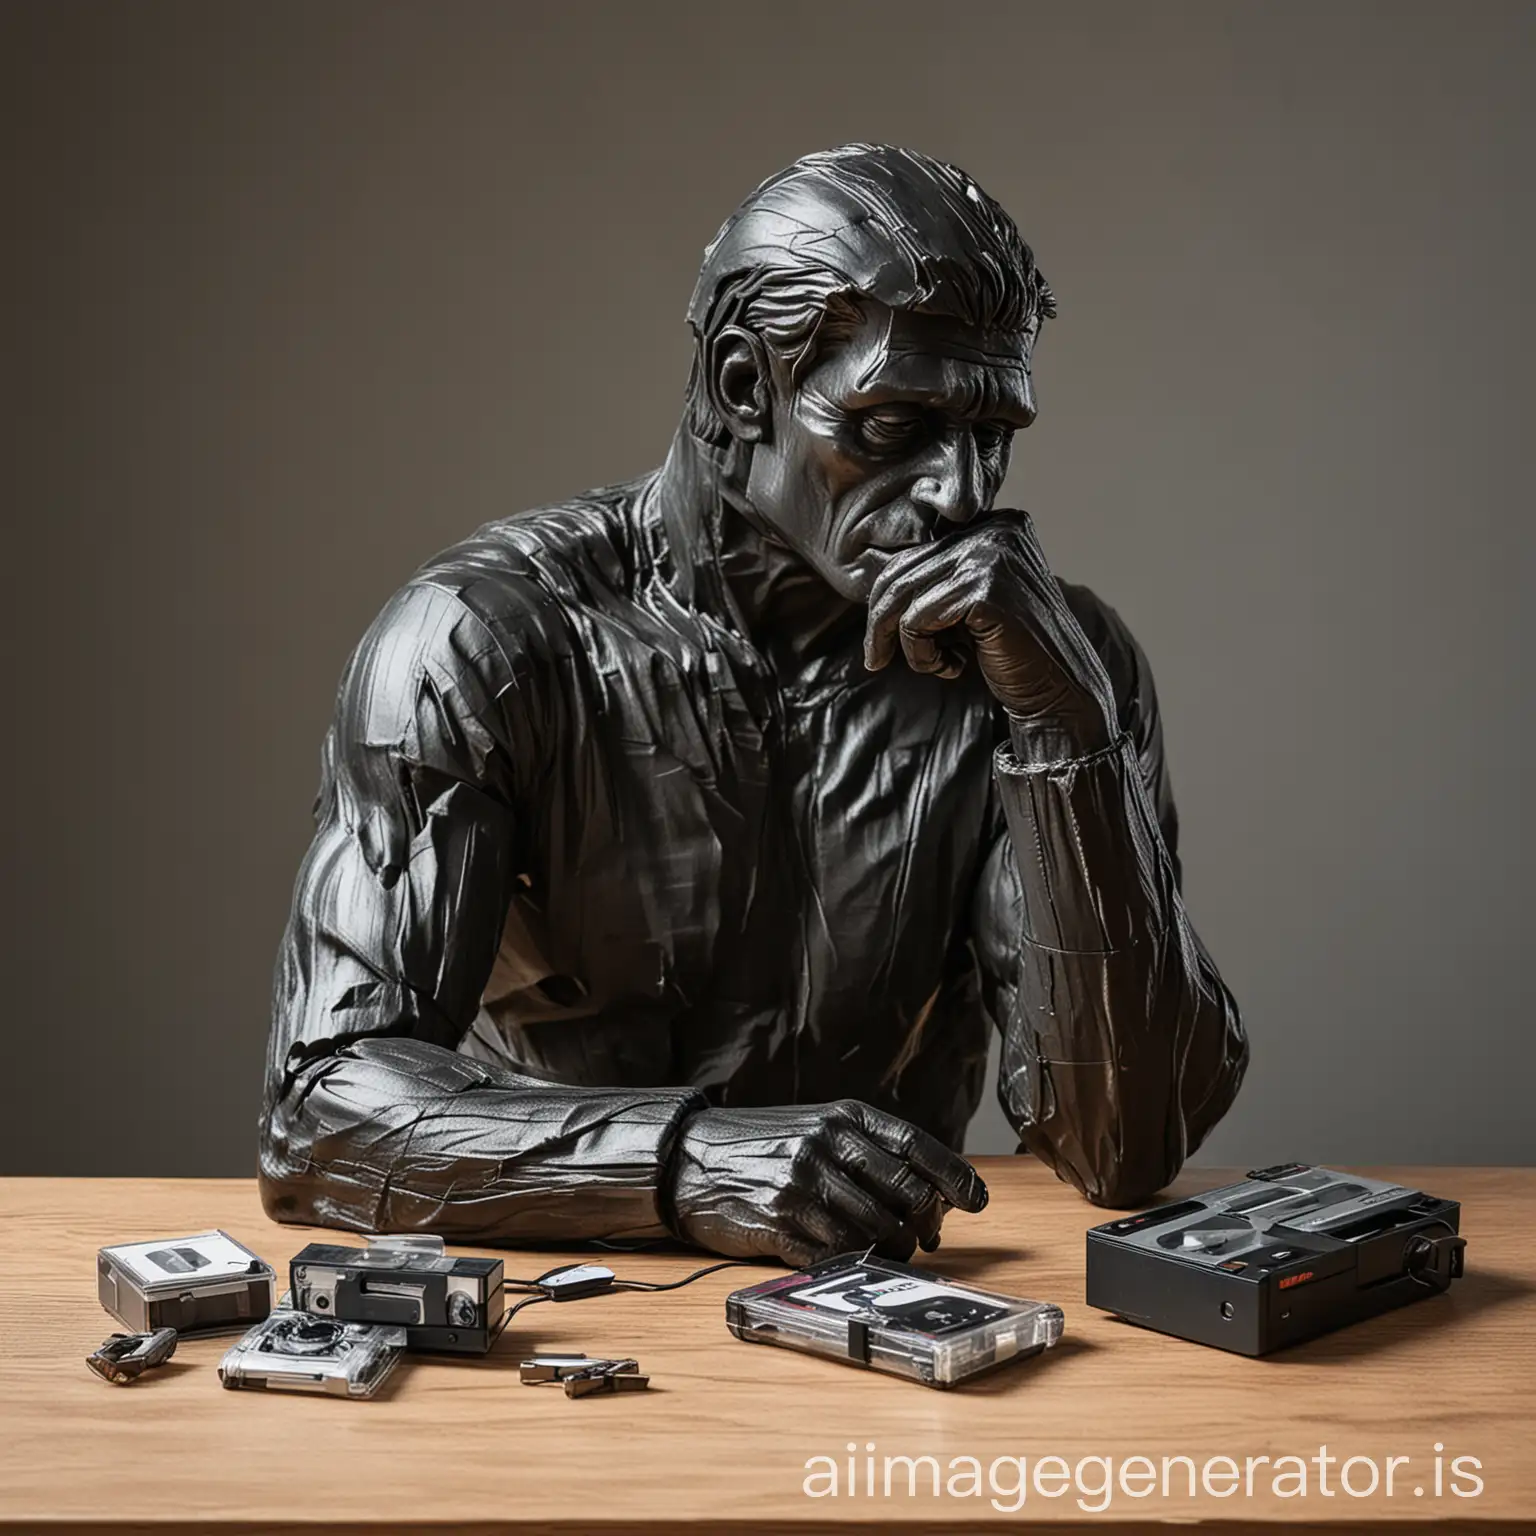 the thinker listening to a cassete tape on a table